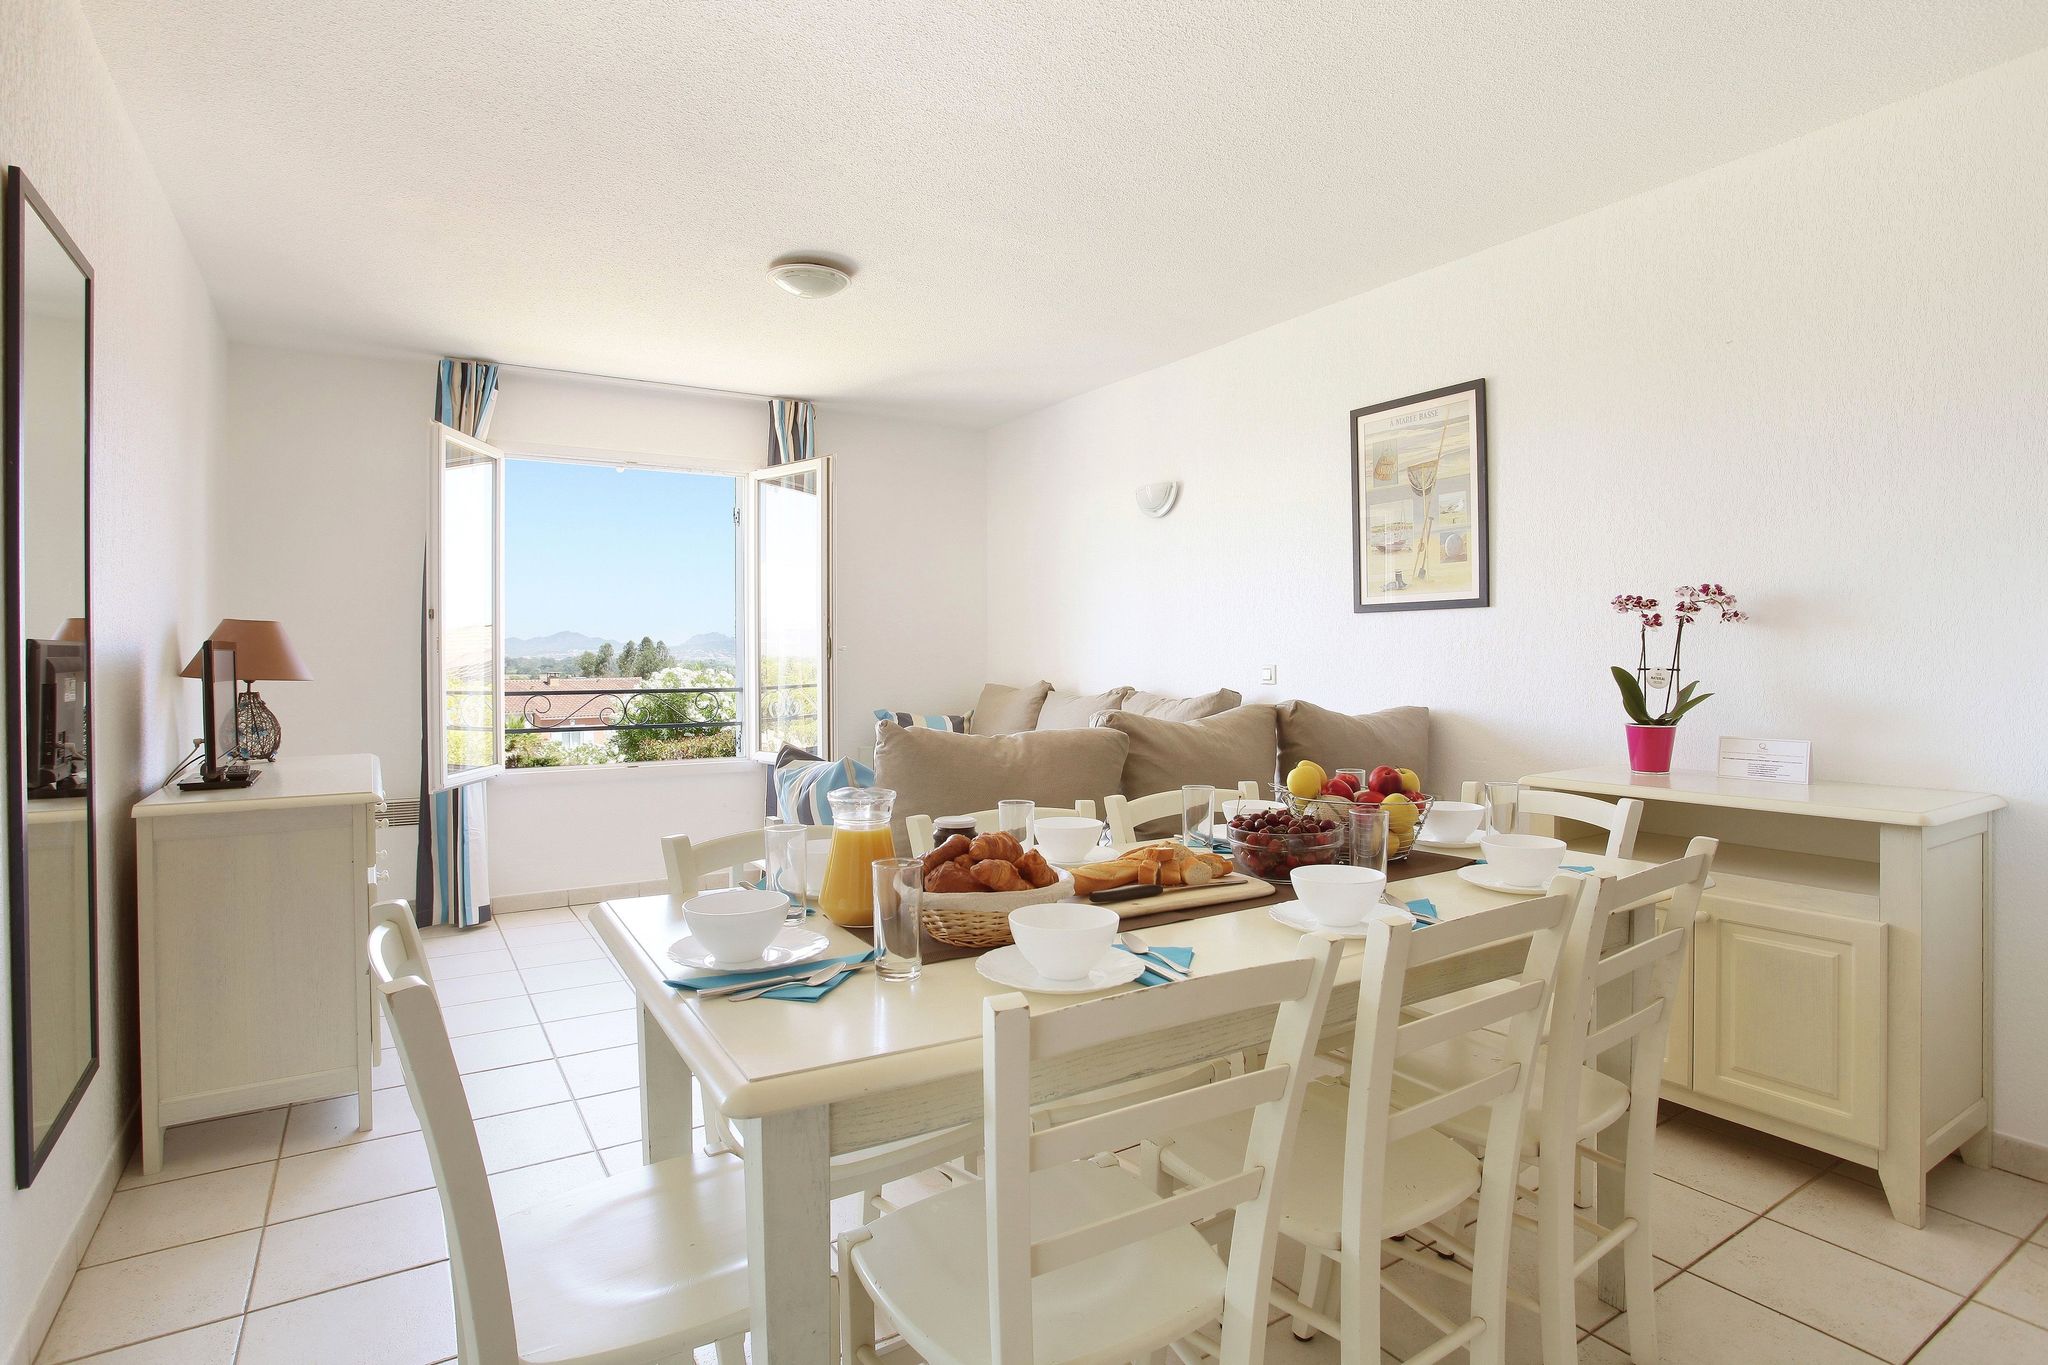 Comfortable apartment with a dishwasher, beach at 2.5 km.